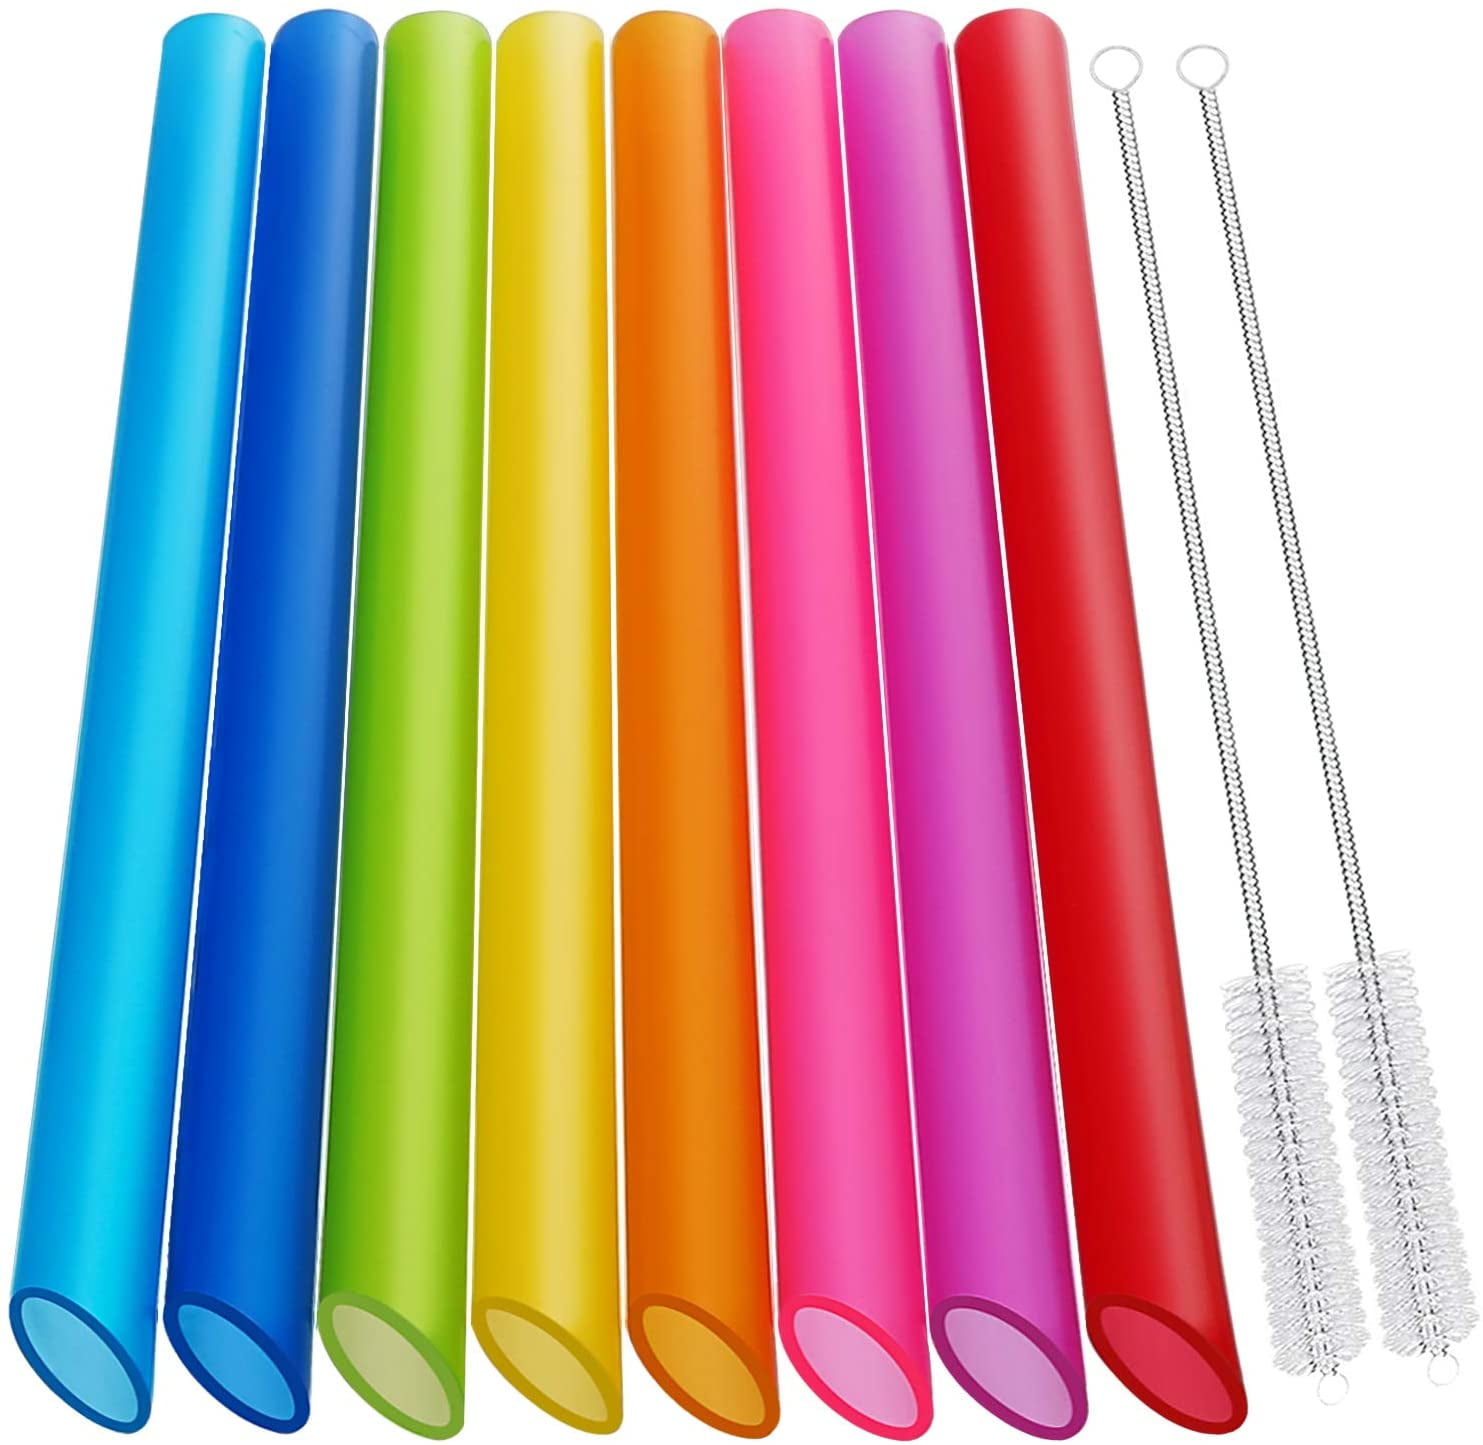 Vannise Stainless Steel Smoothie Straws, 0.4' Extra Wide Reusable Metal Drinking Straws for Milkshake, Boba, Smoothie, Beverage, Set of 4 with 1